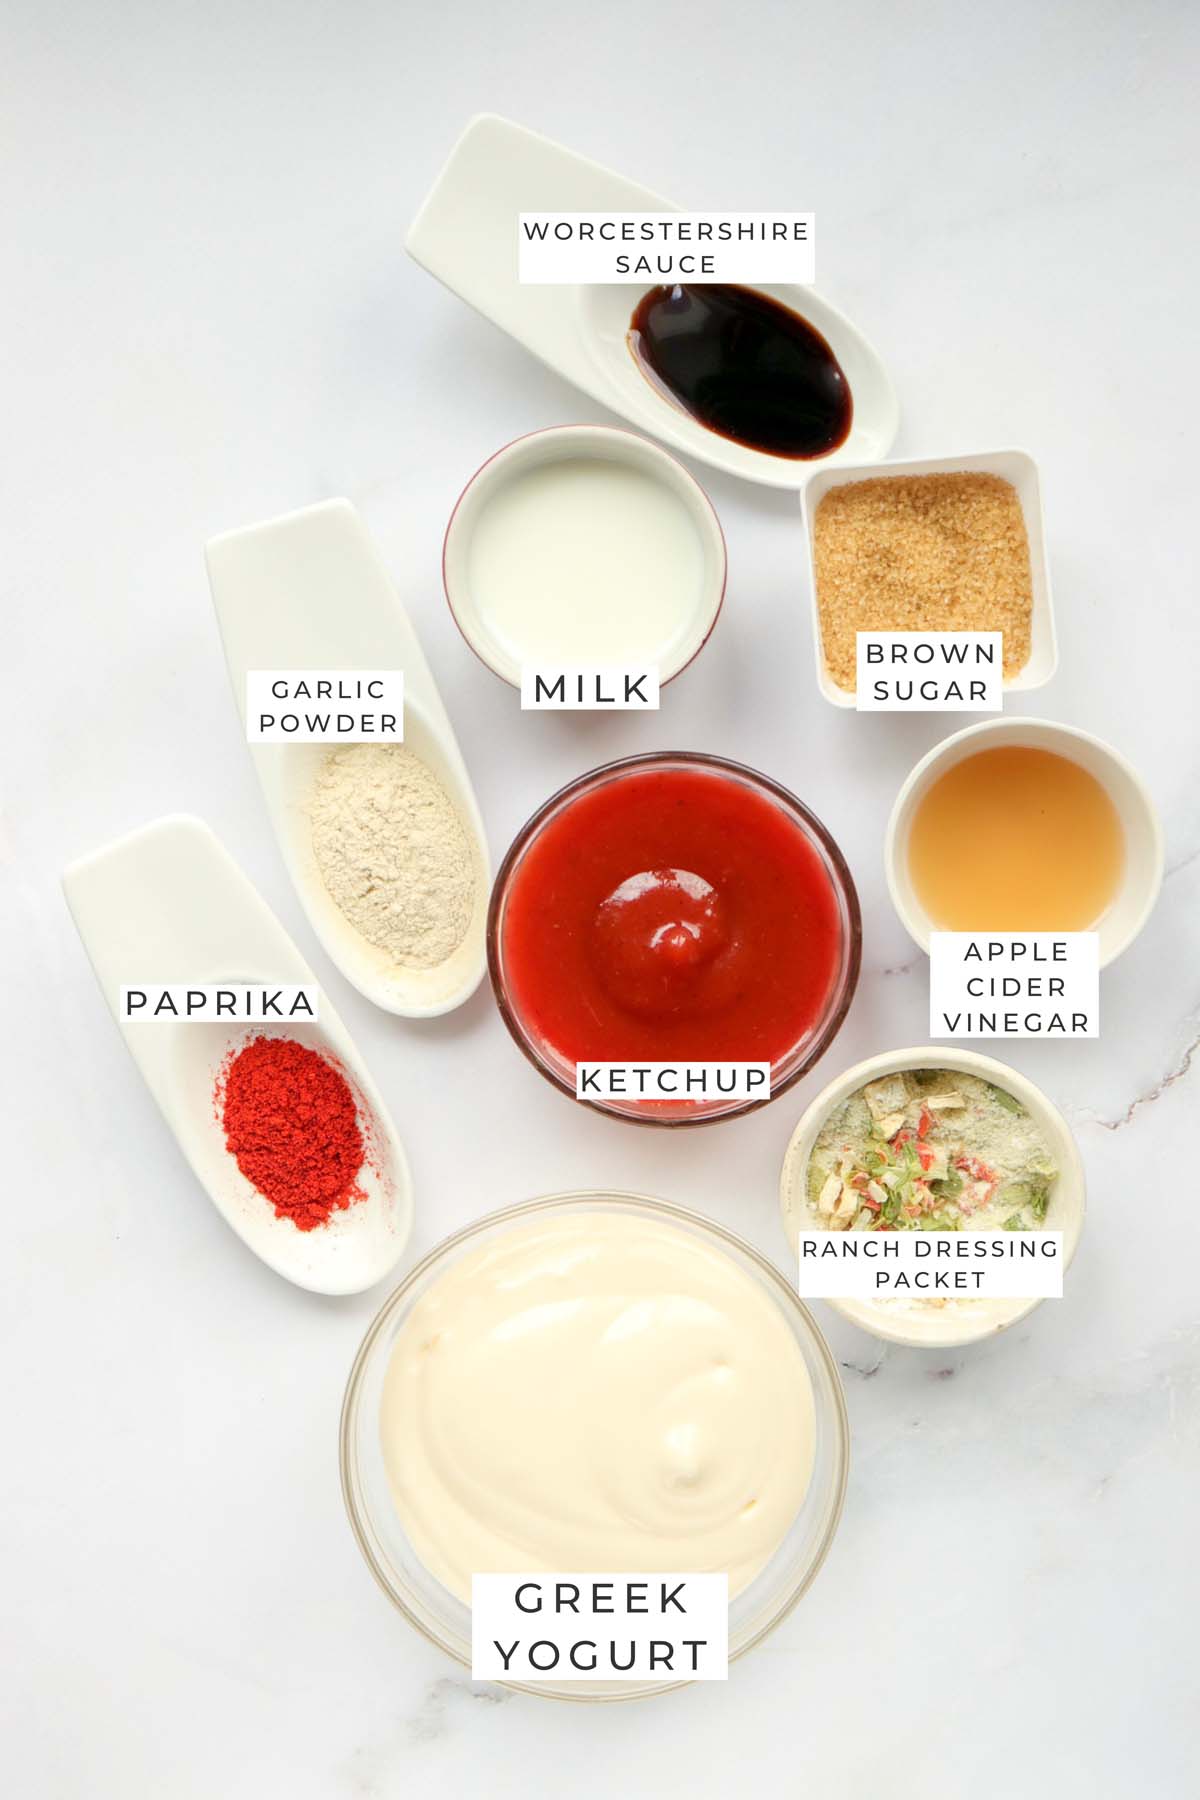 bbq ranch dressing labeled ingredients.